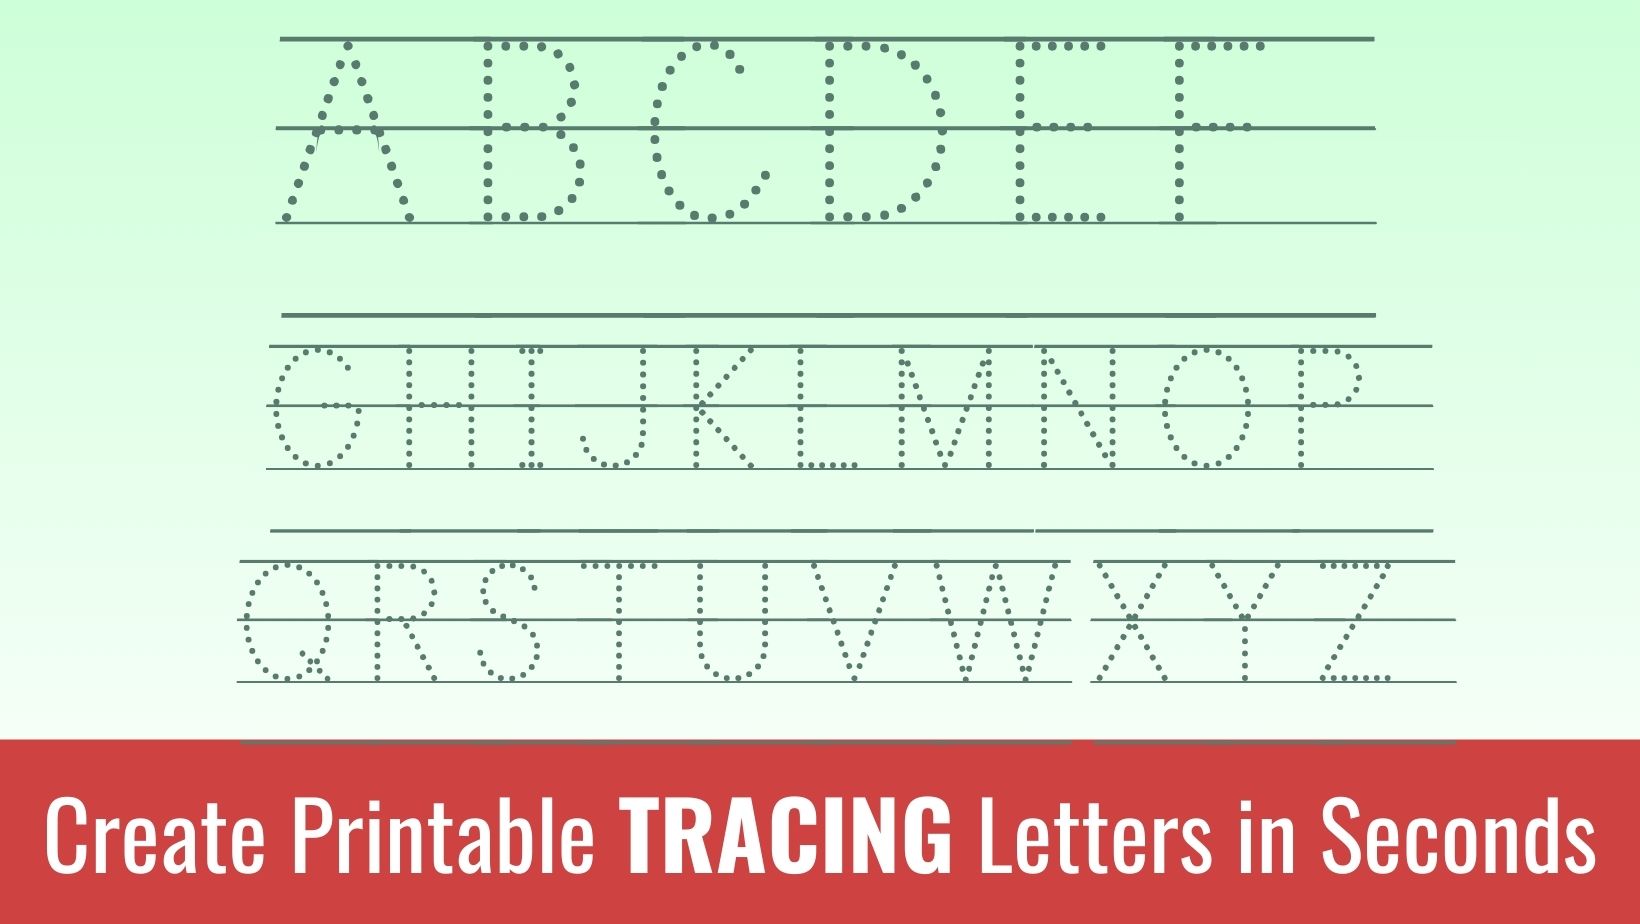 Printable tracing Letters: Free Alphabet Font and Letter Templates